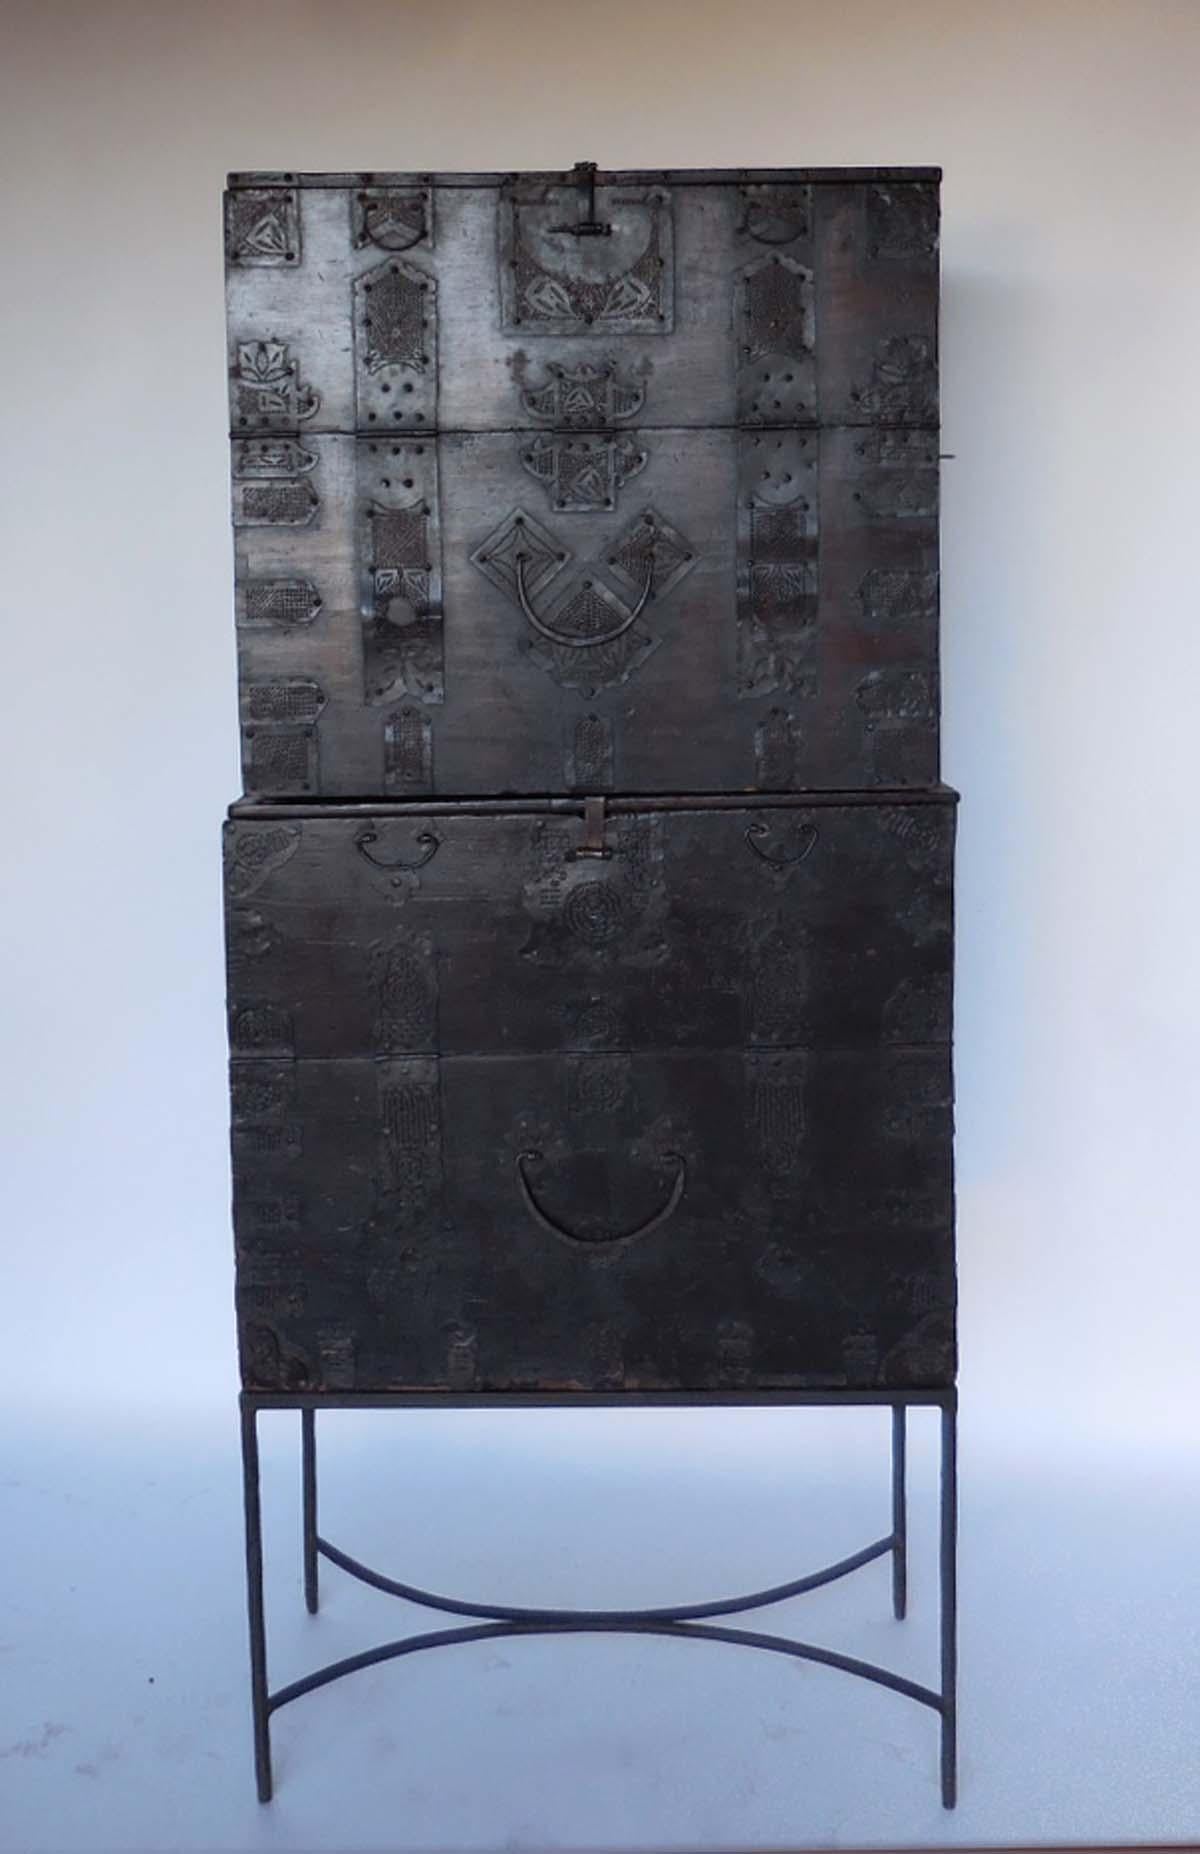 Pair of 18th century Korean Chests stacked atop each other. Intricate metal cutout work decorates the pieces. Some metal repairs have been made is the distant past. Top front panel drops down for storage. The chest are about the same size but the